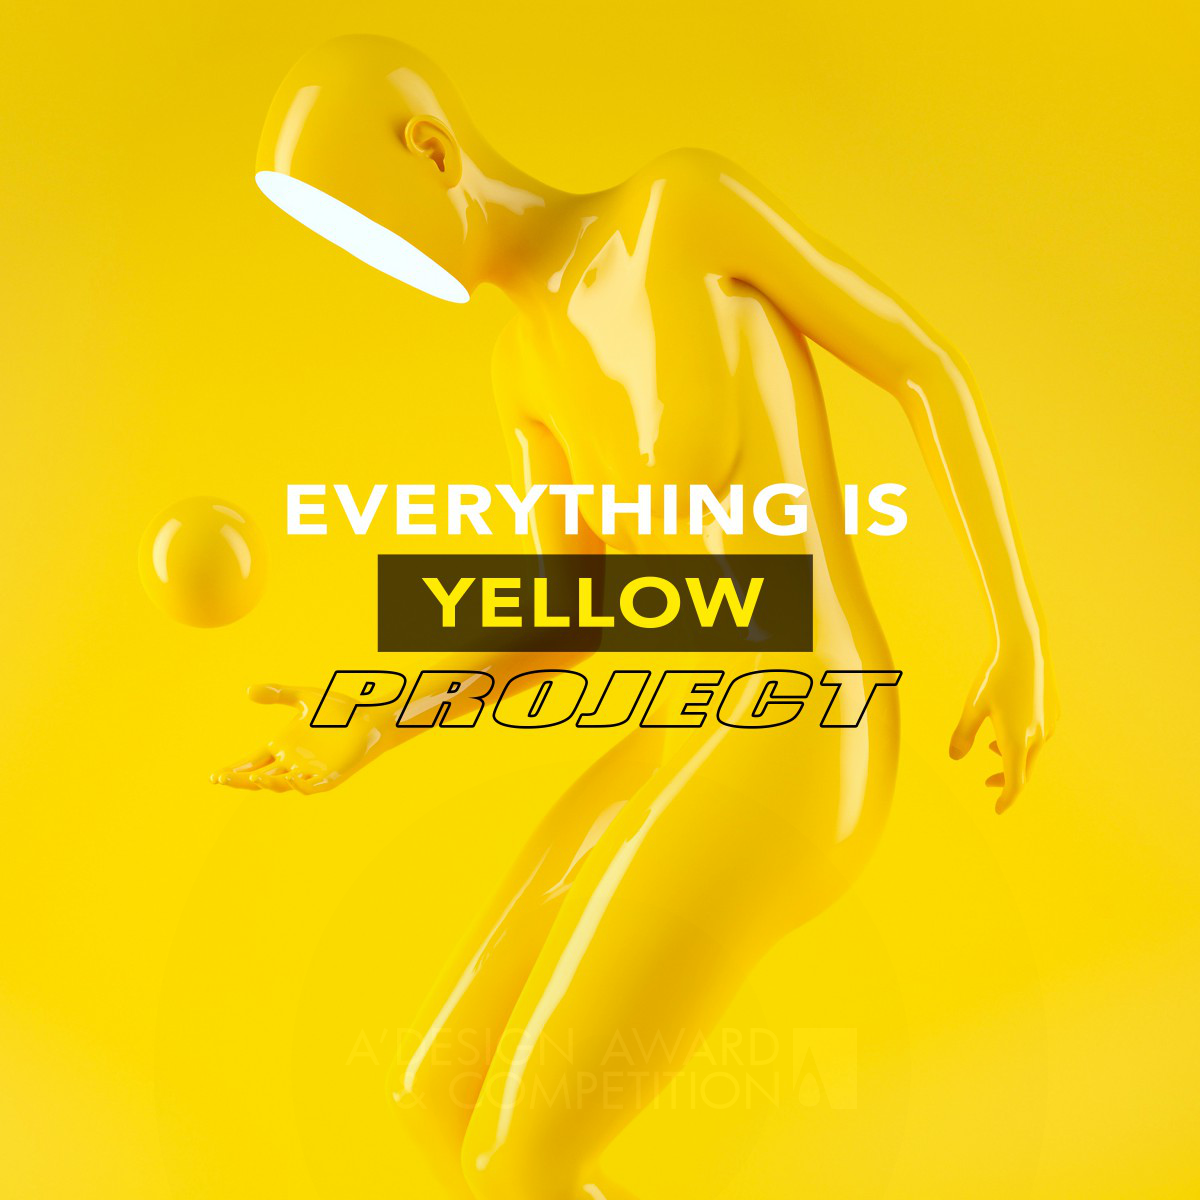 Project Yellow Brand Promotion 